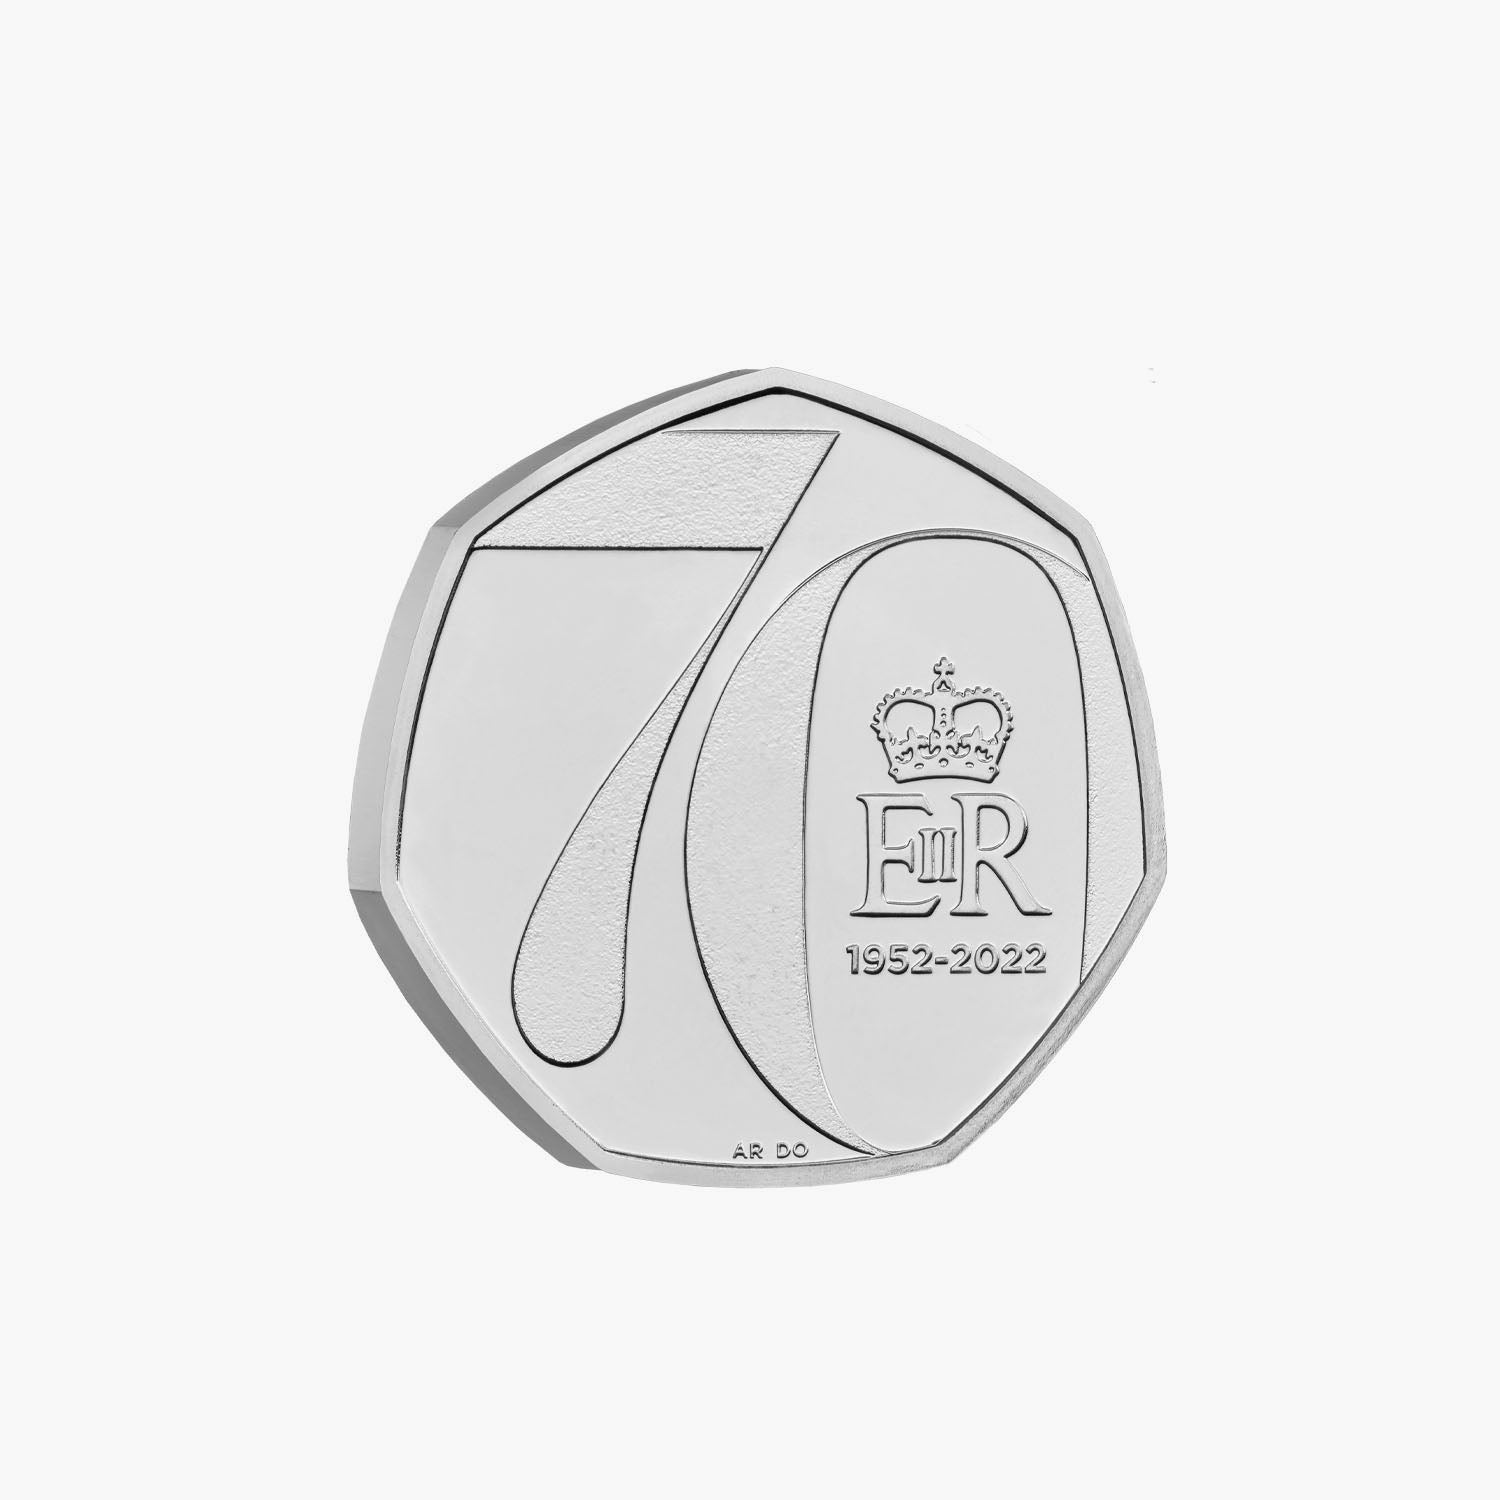 The Platinum Jubilee of Her Majesty The Queen 2022 UK 50p BU Coin